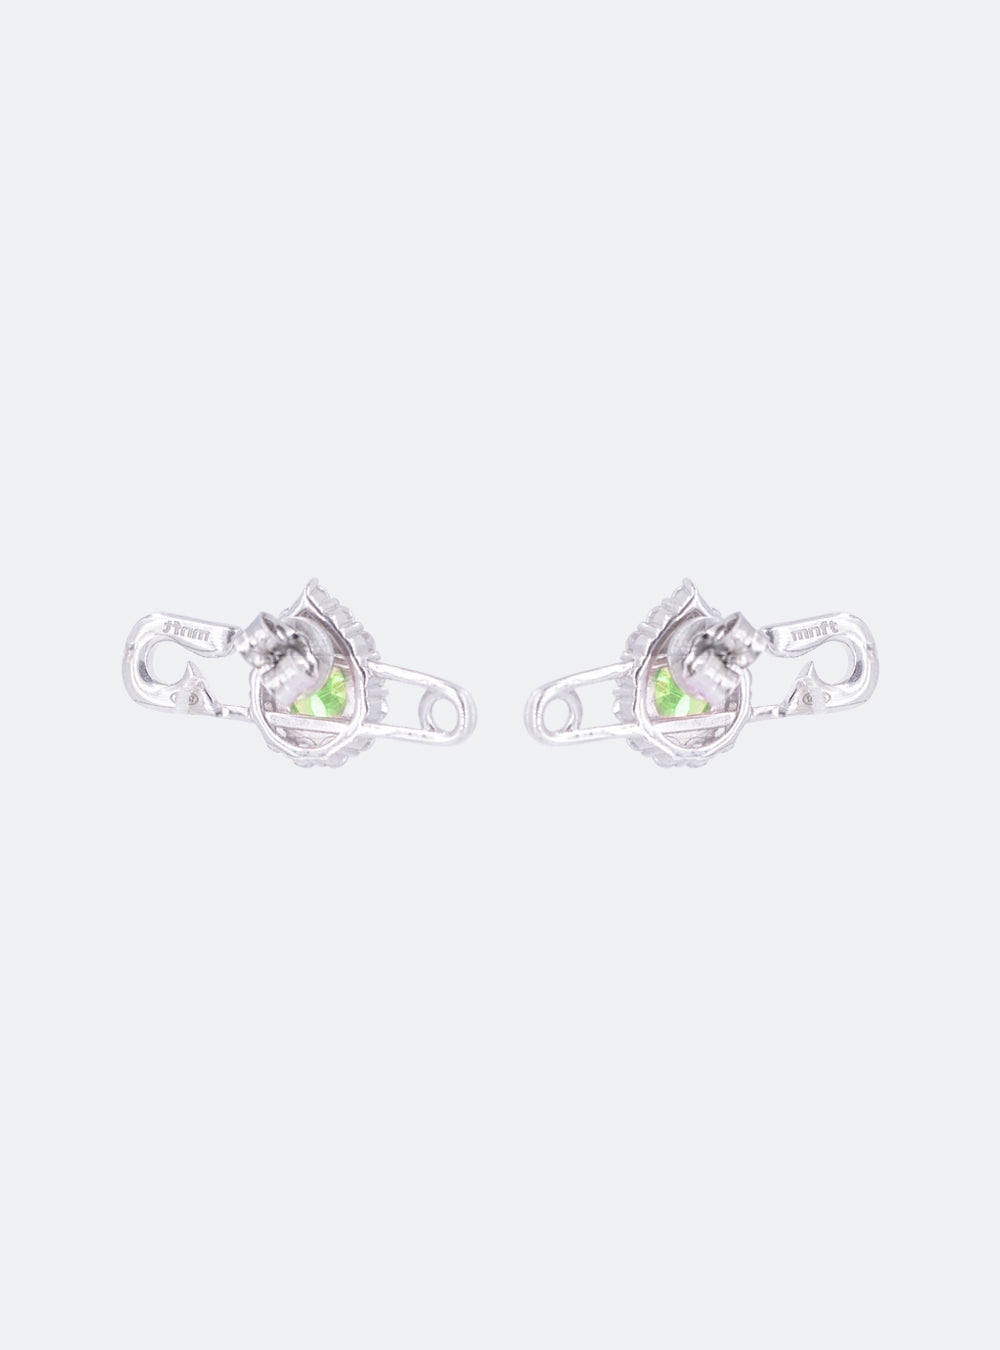 A pair of MIDNIGHTFACTORY Cocktail safety-pin earrings with green stones on a white background.